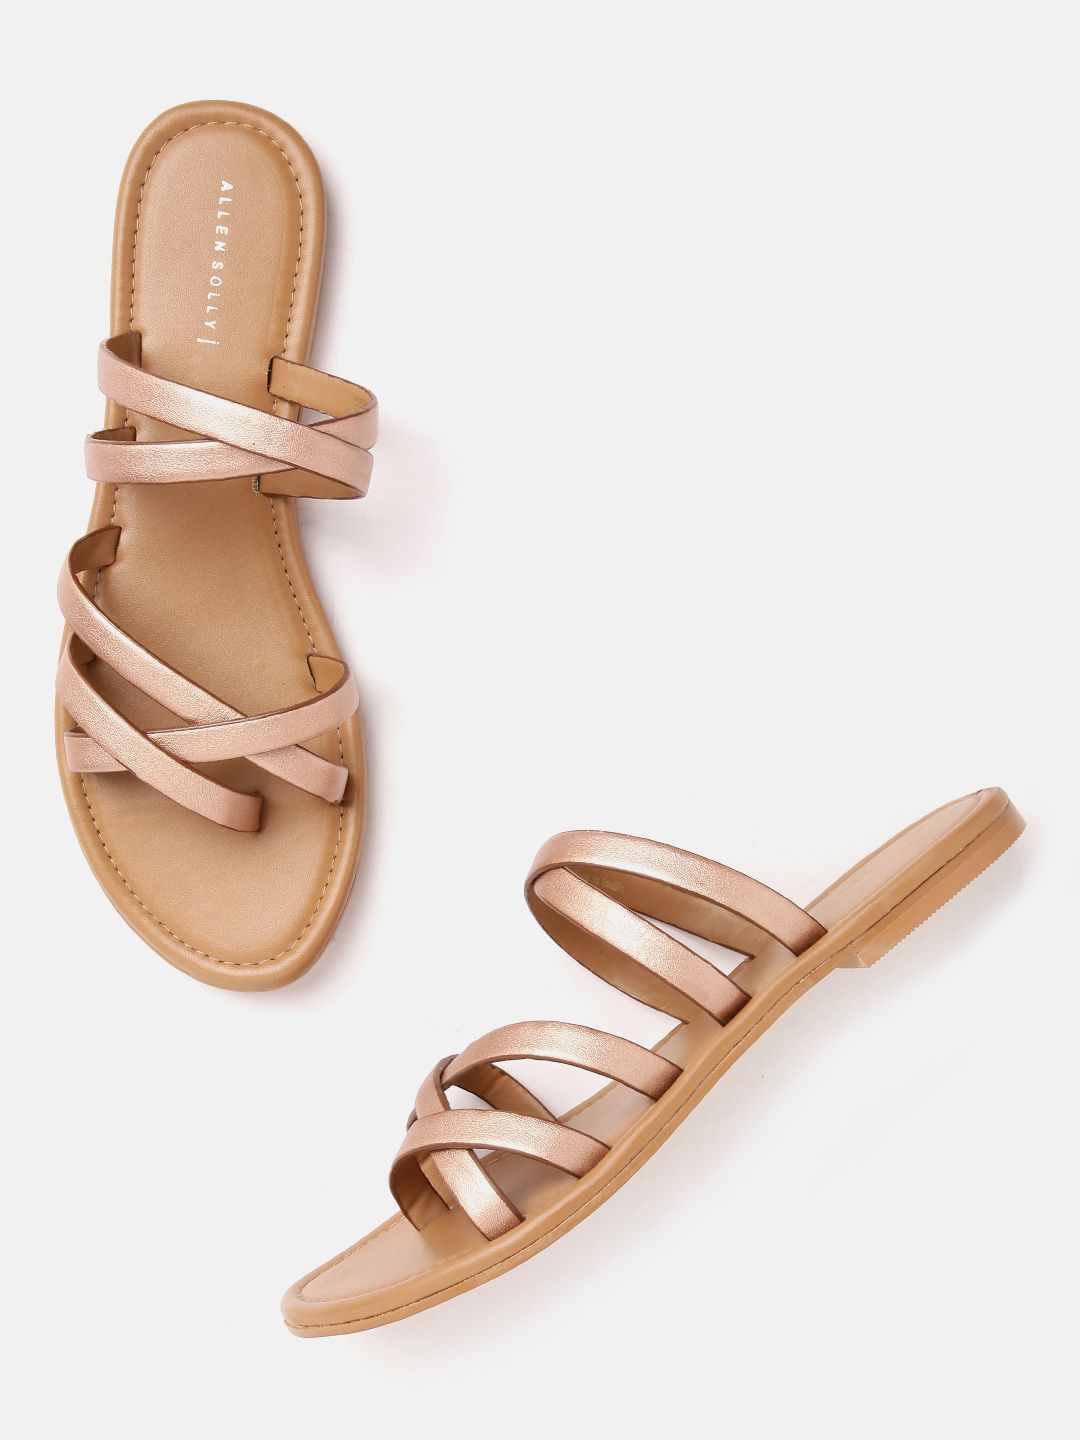 Allen Solly Women Rose Gold-Toned Strappy Open Toe Flats Price in India